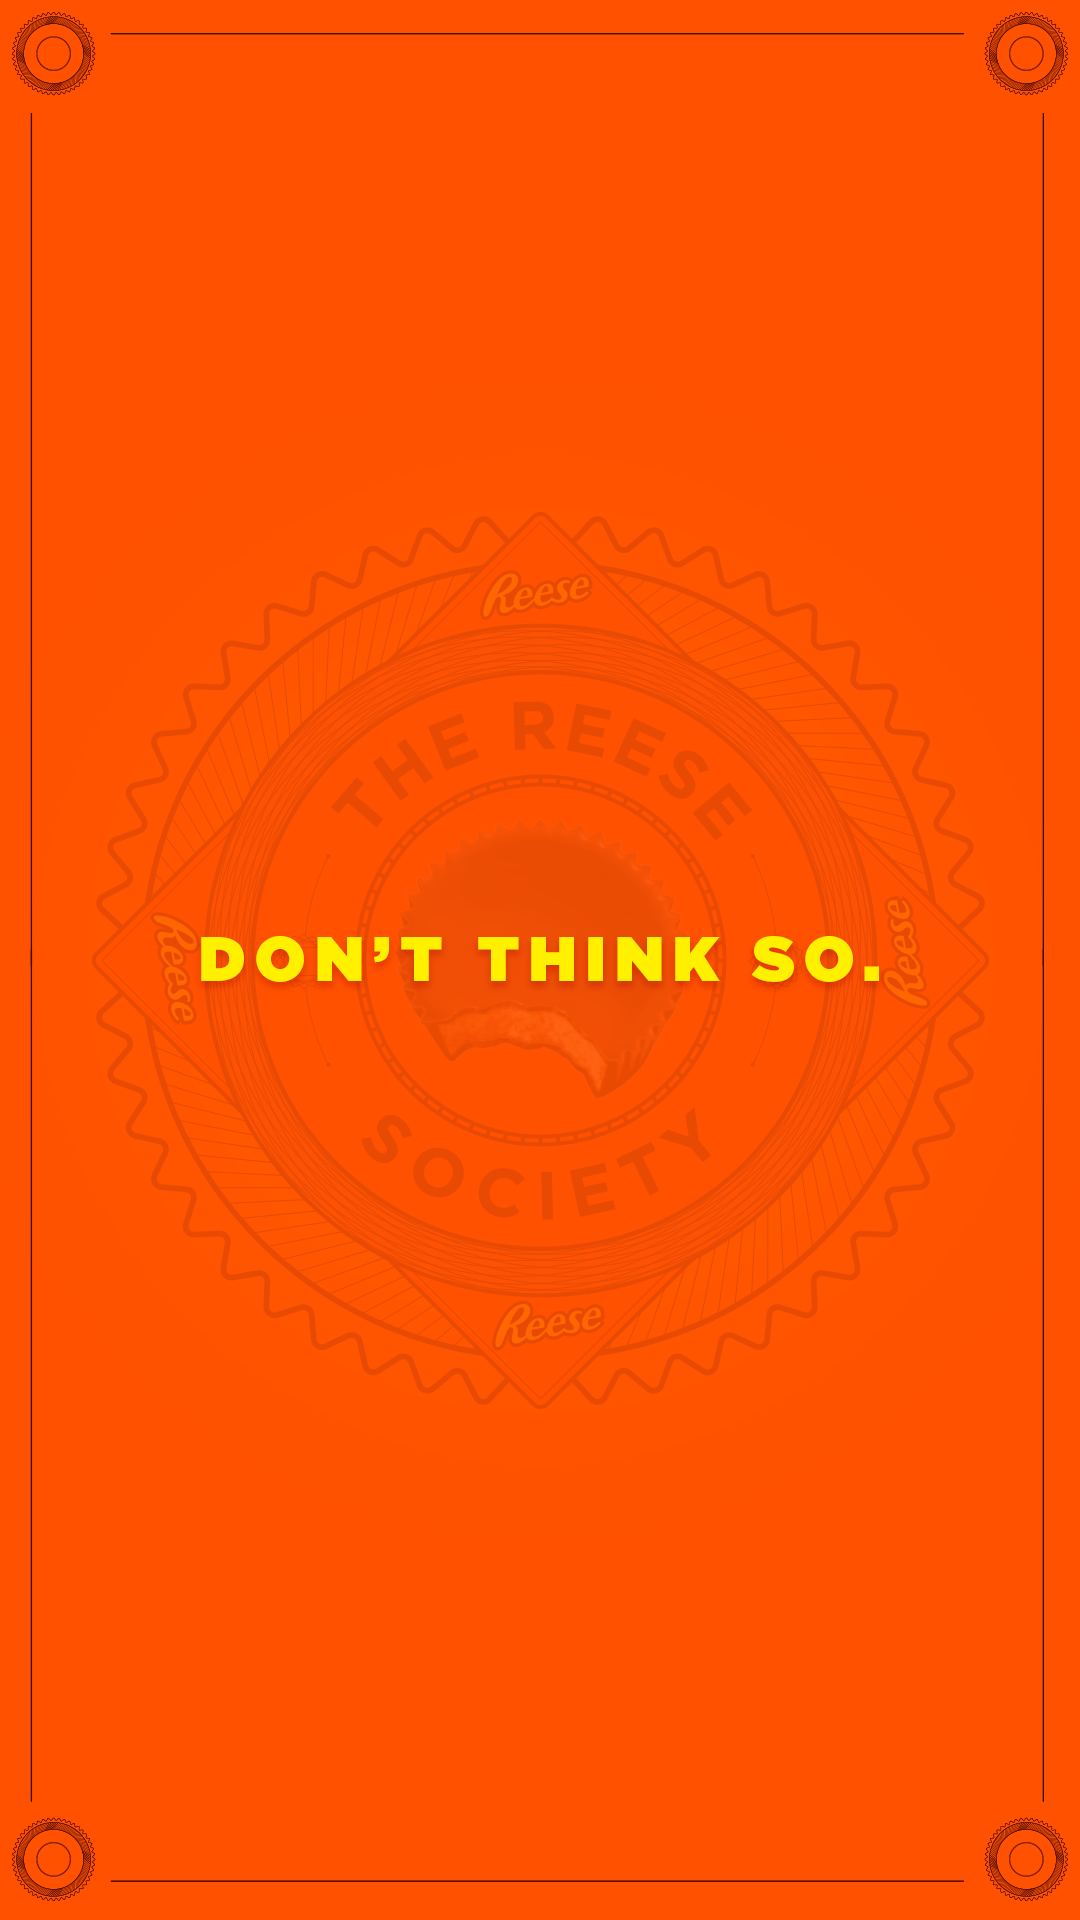 Reese-Society-IG_0026_Don’t-think-so.png